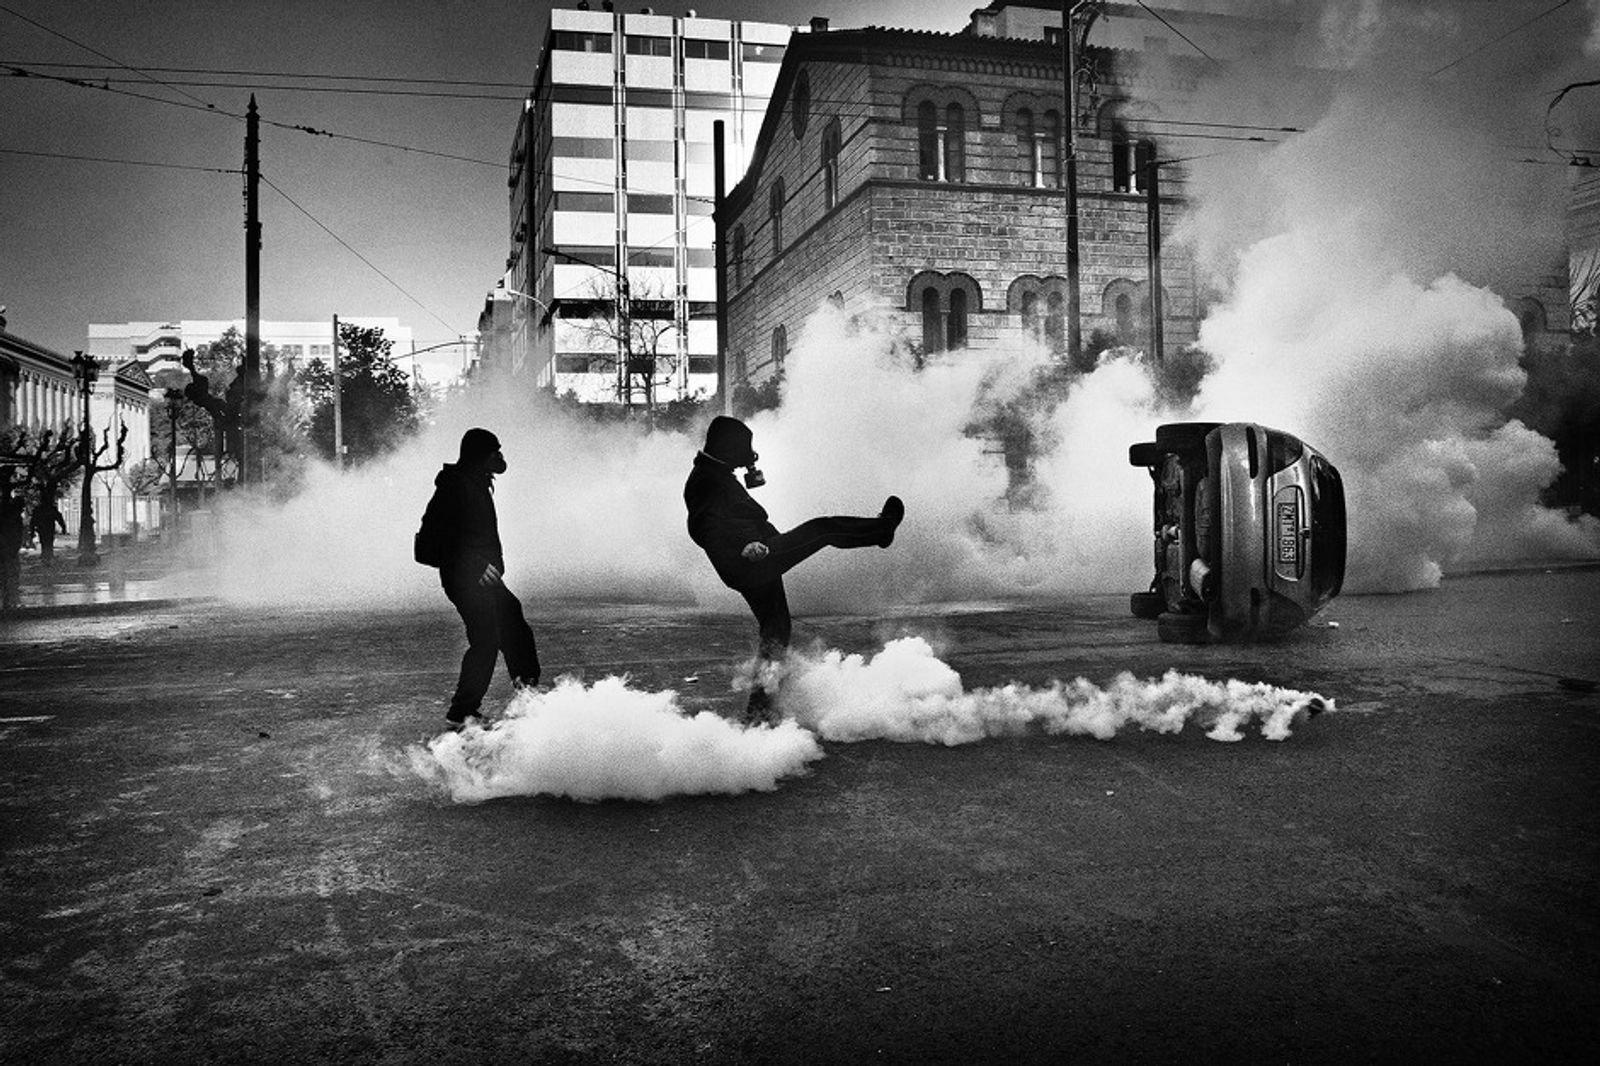 © Nikos Pilos - 2008. Two protesters wearing gas masks are kicking away a tear-gas canister.